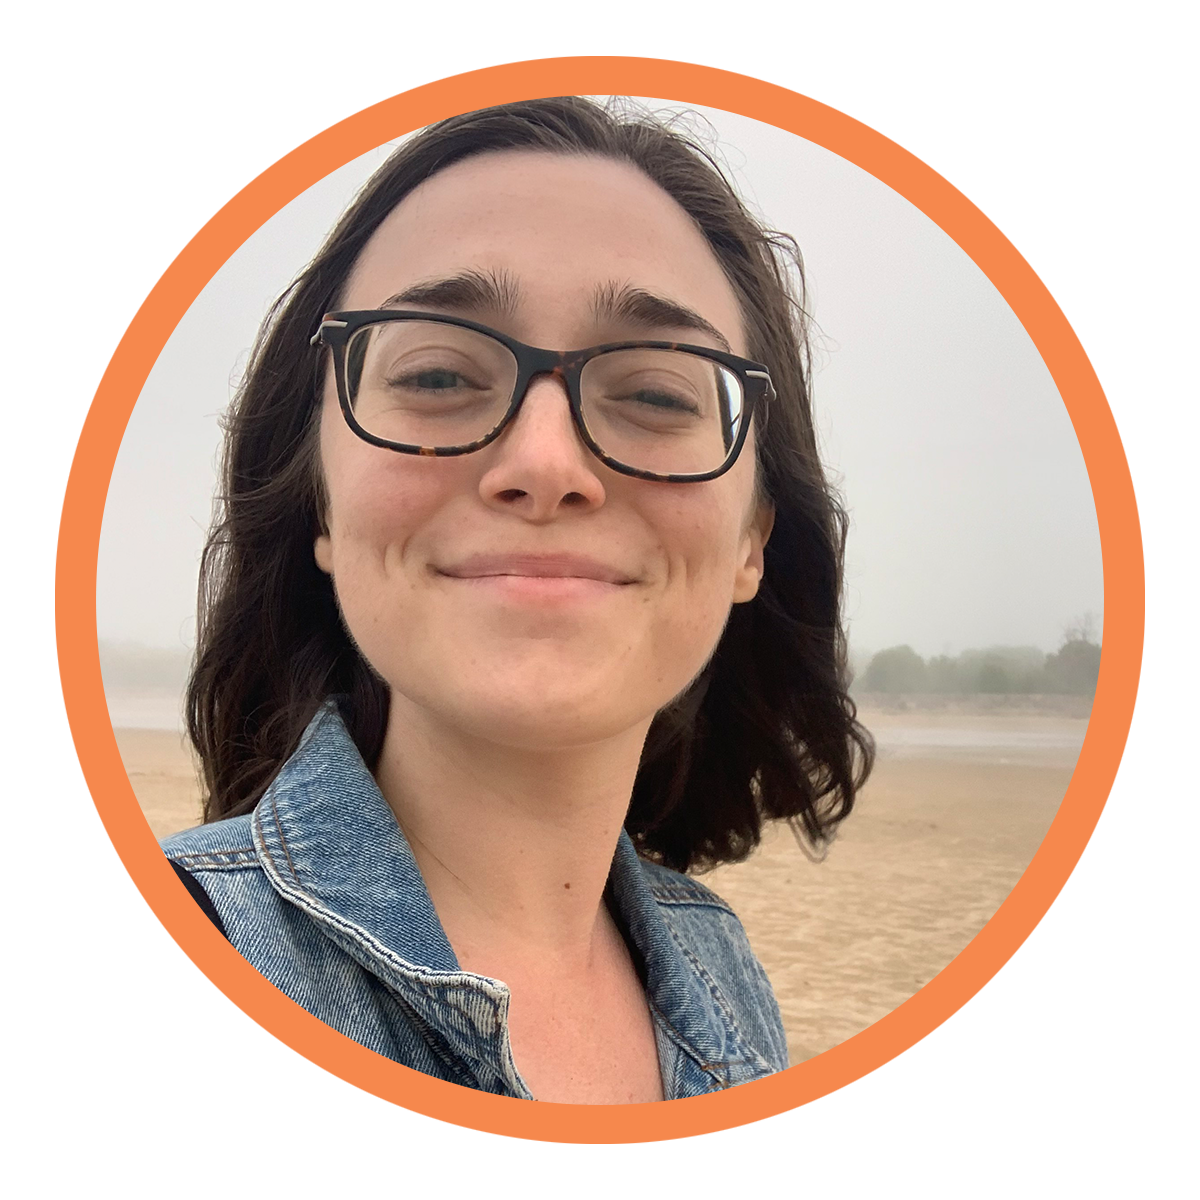  Anna lives in the Cross Timbers and Prairies Ecoregion of North Texas. She is committed to creating a just and loving world, grounded in the values of human dignity and sustainability. Writing is her craft.  